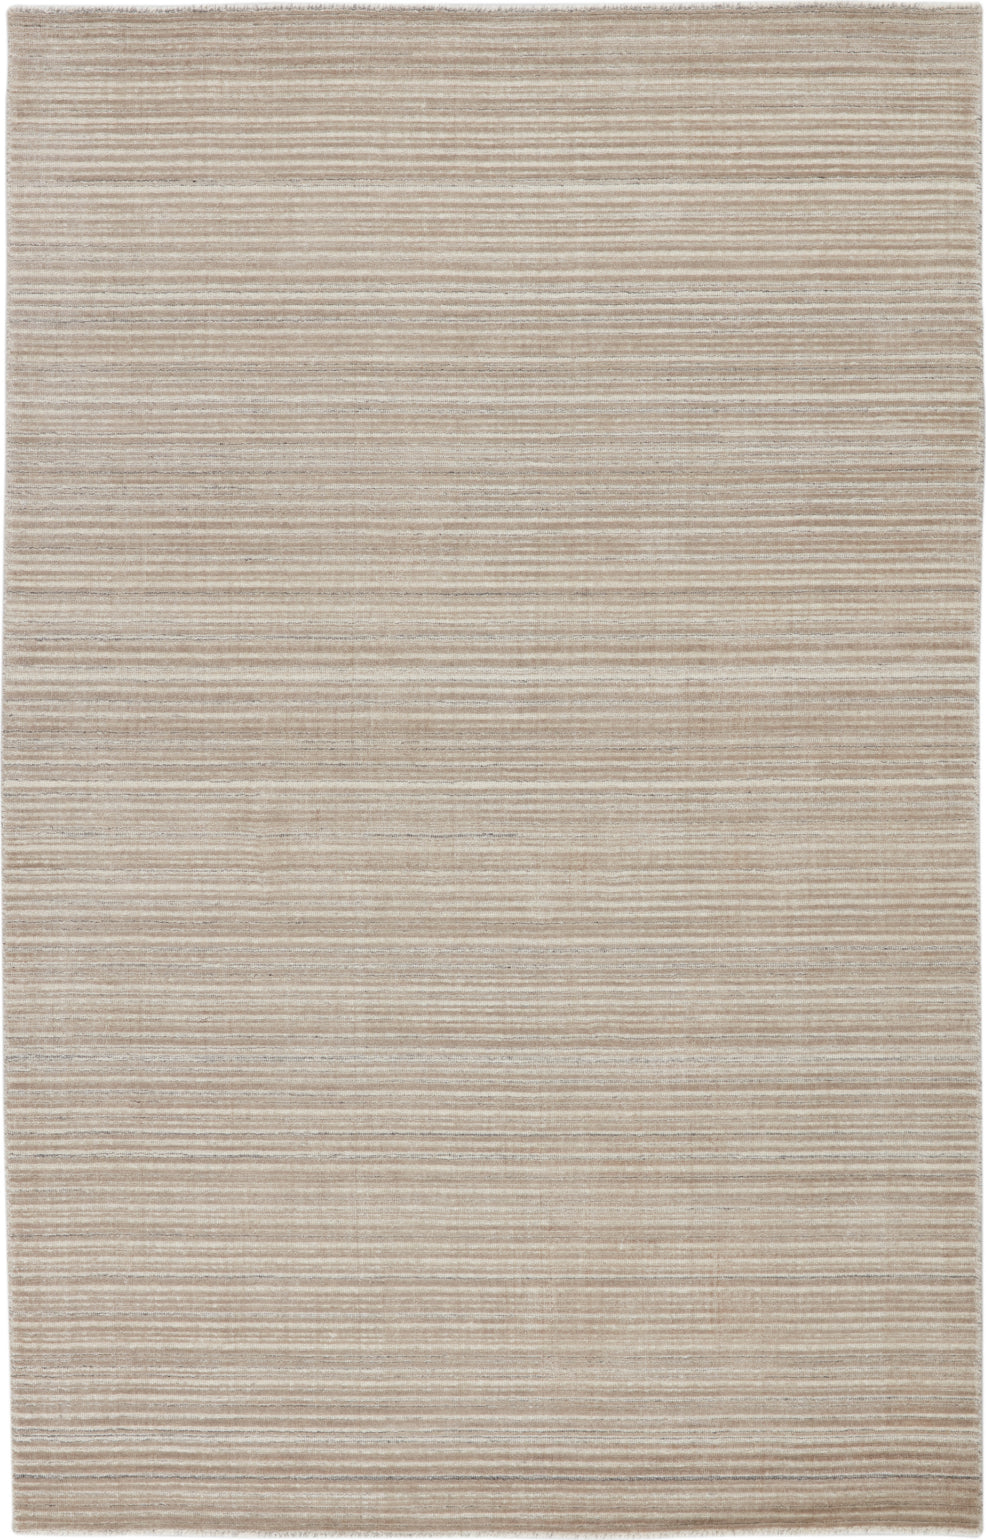 Jaipur Living Second Sunset Gradient SST04 Gray/Light Taupe Area Rug - Top Down